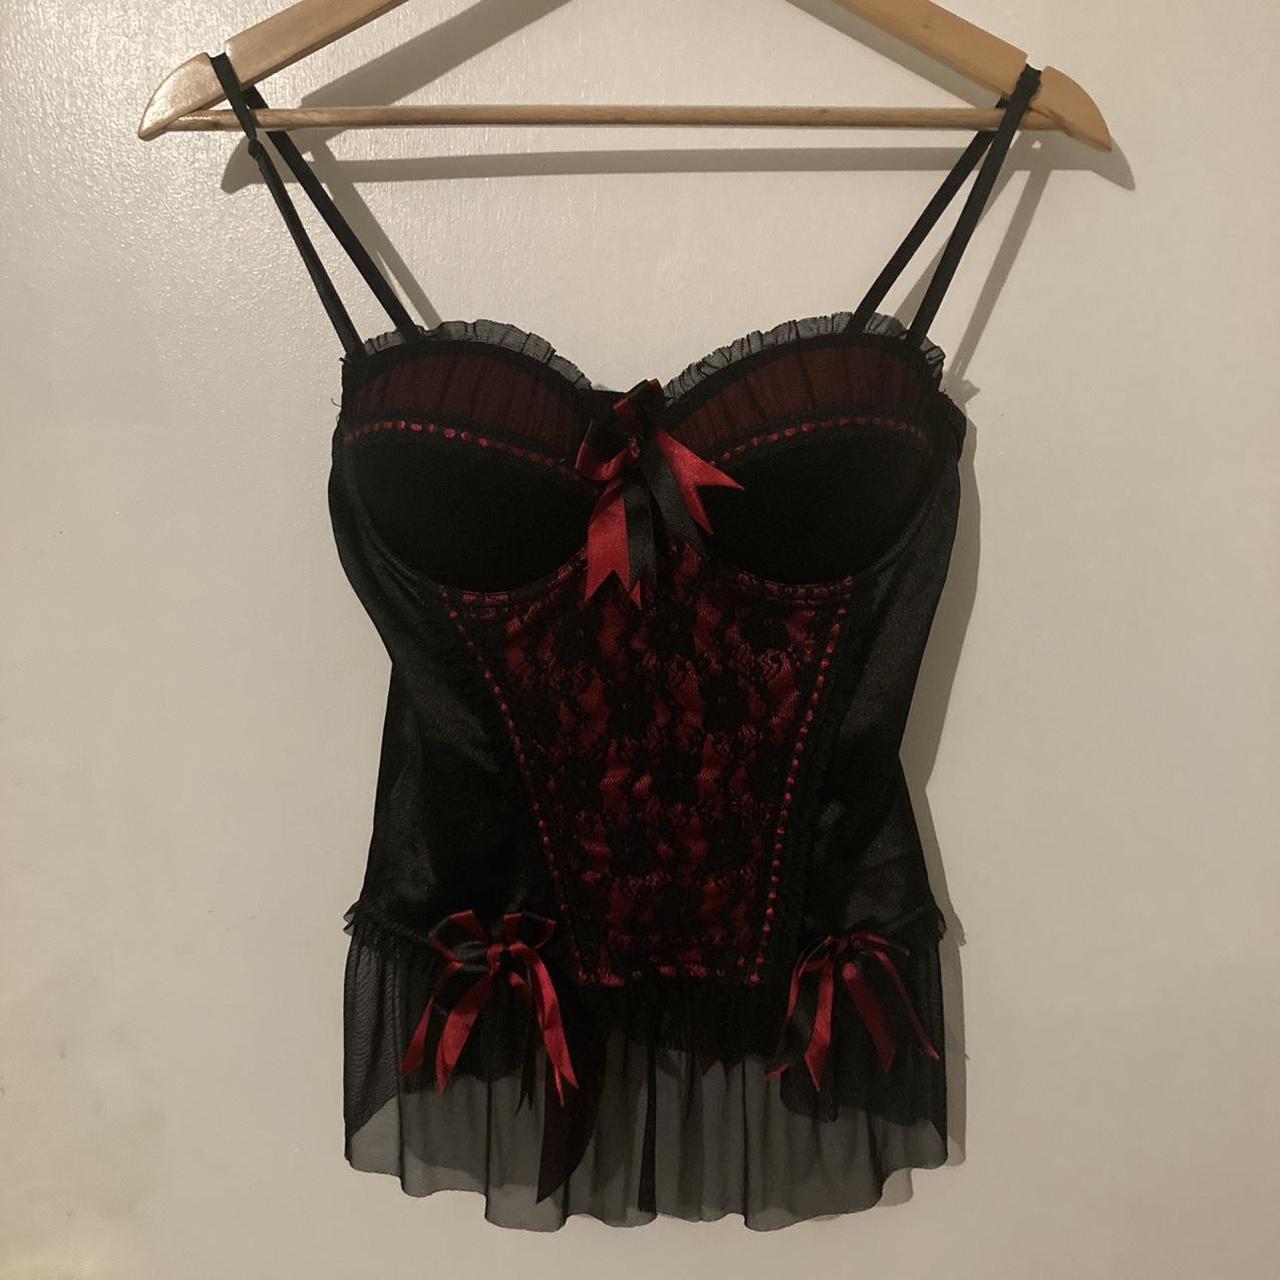 Vampire bustier / corset / lingerie top , Perfect for